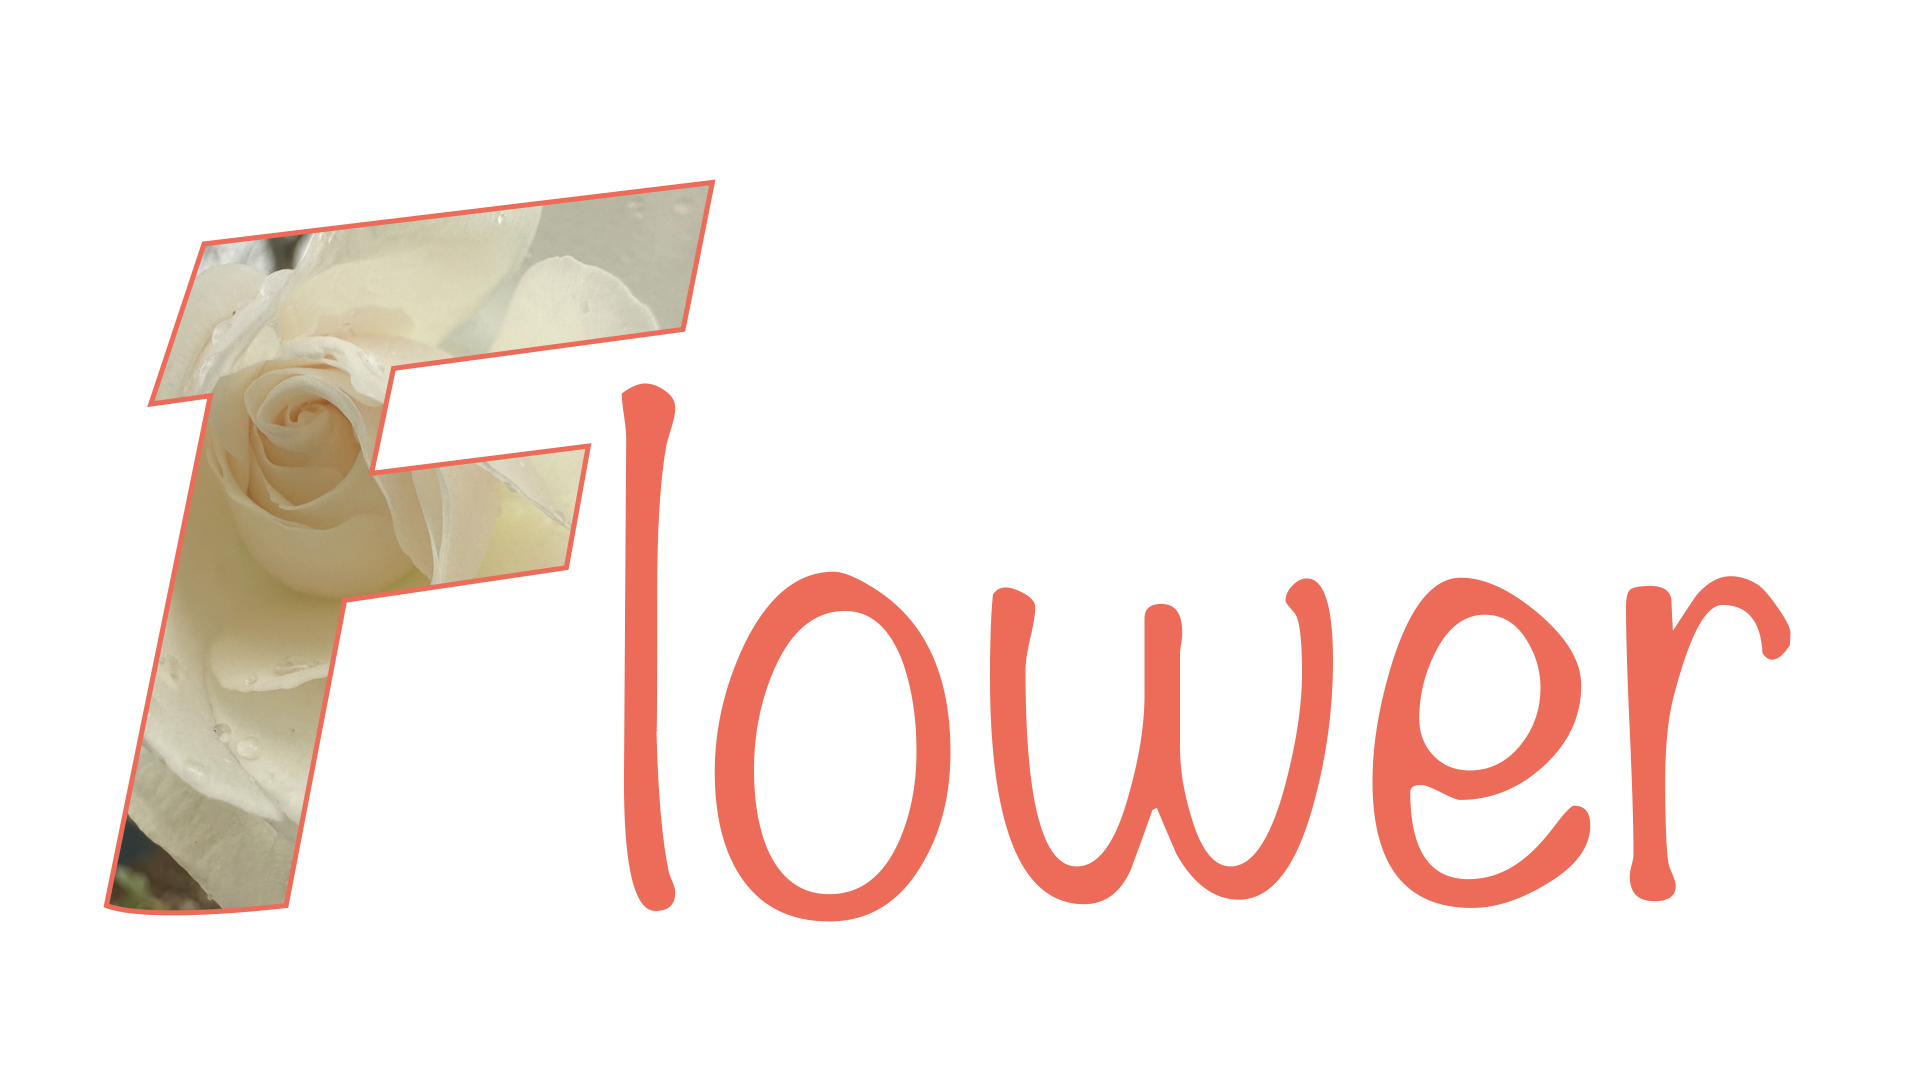 The word flower with the picture of a flower in the F of the word.